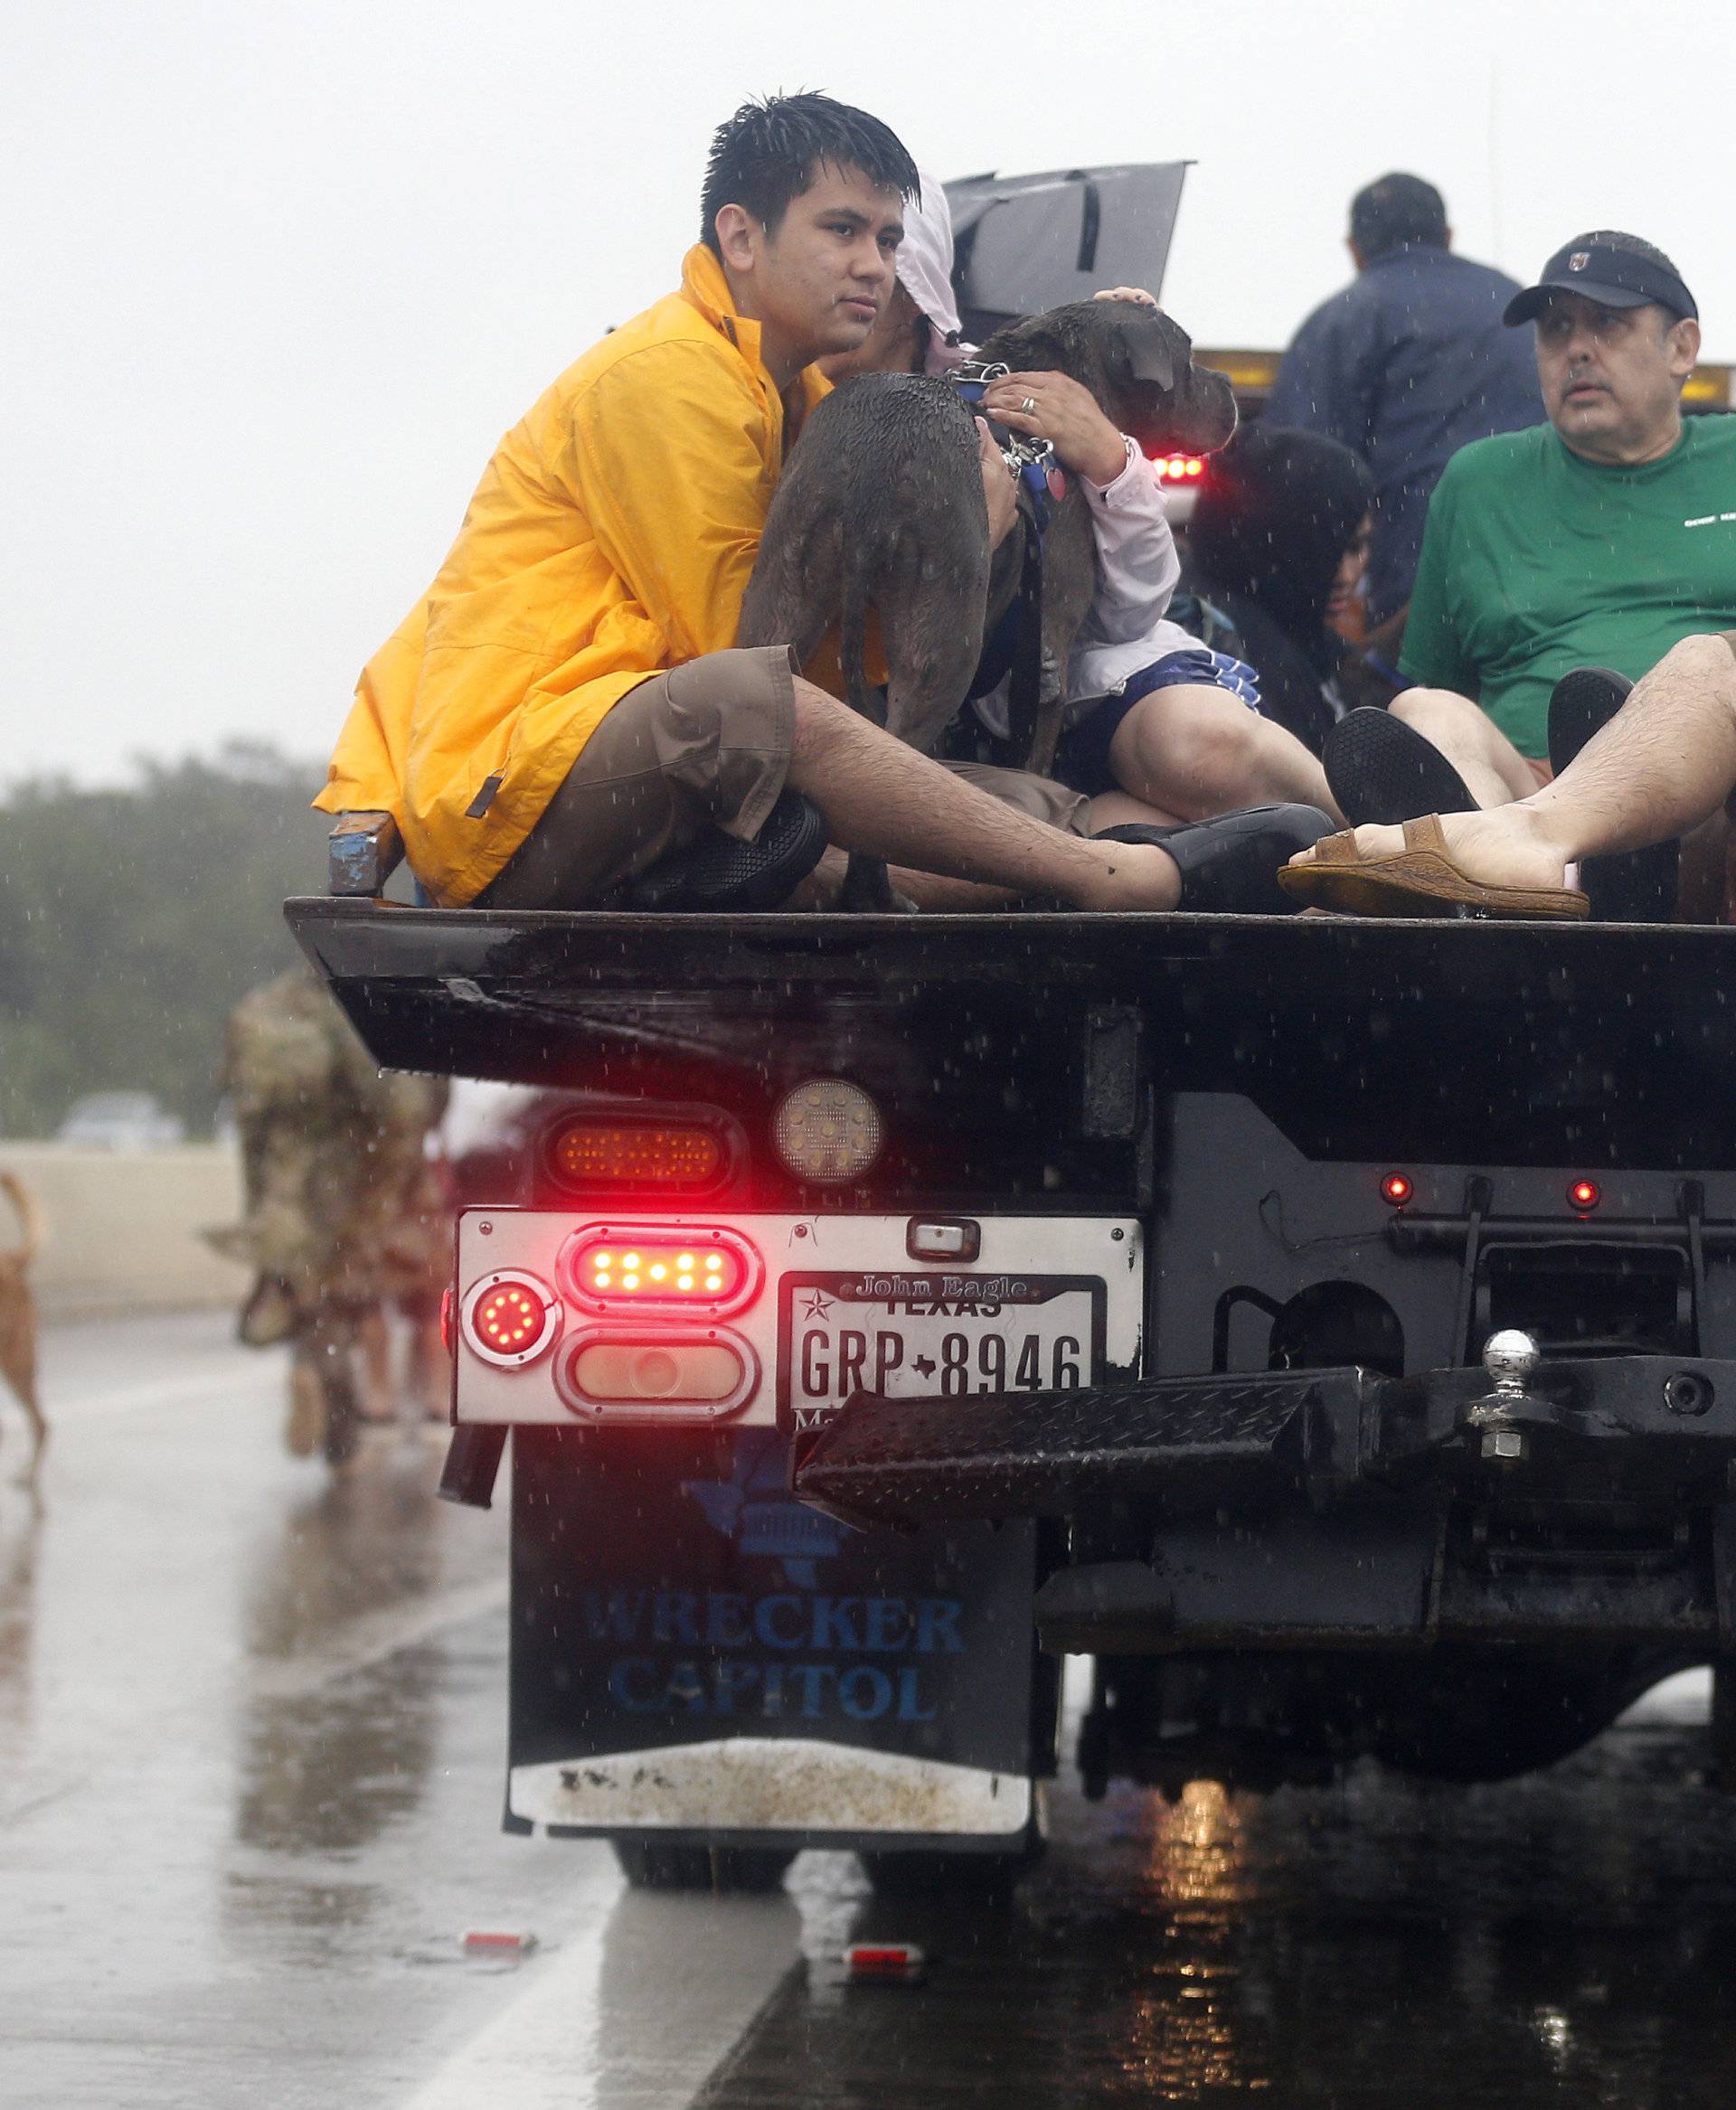 Residents sit on the bed of a tow truck after being rescued from the flood waters of tropical storm Harvey in east Houston